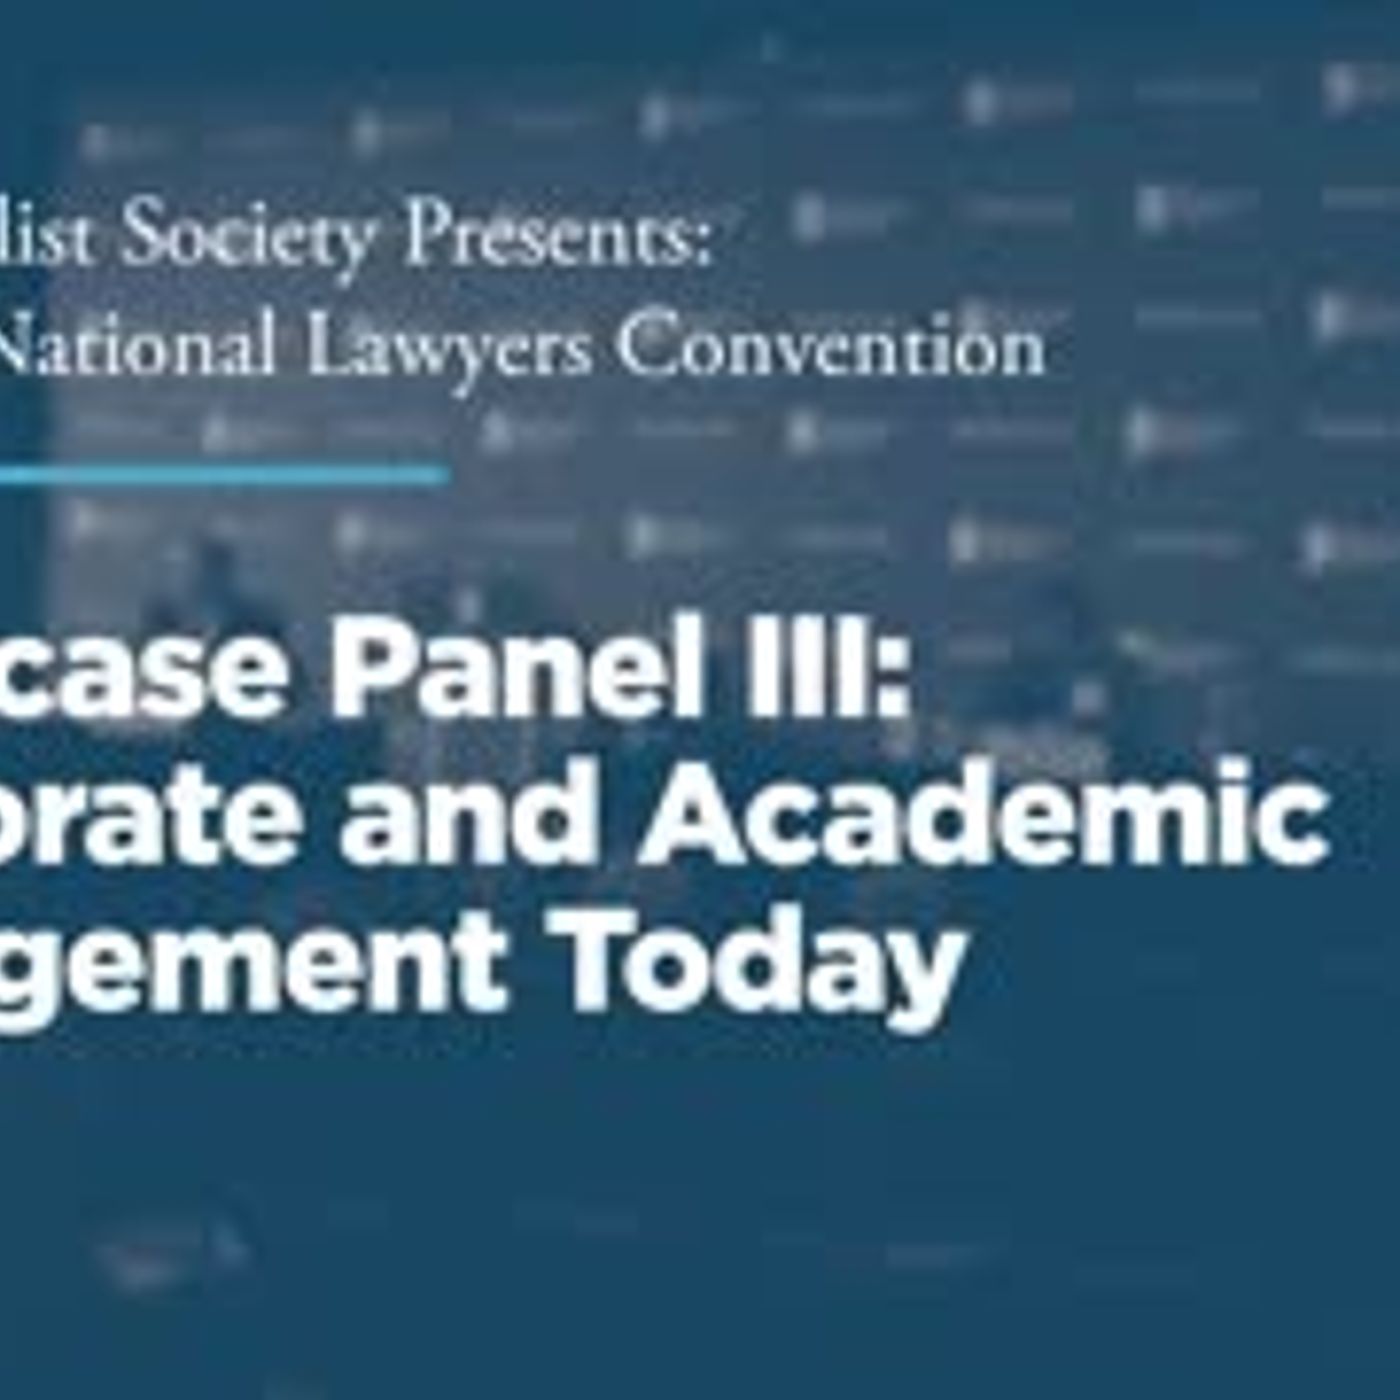 Showcase Panel III: Corporate and Academic Management Today